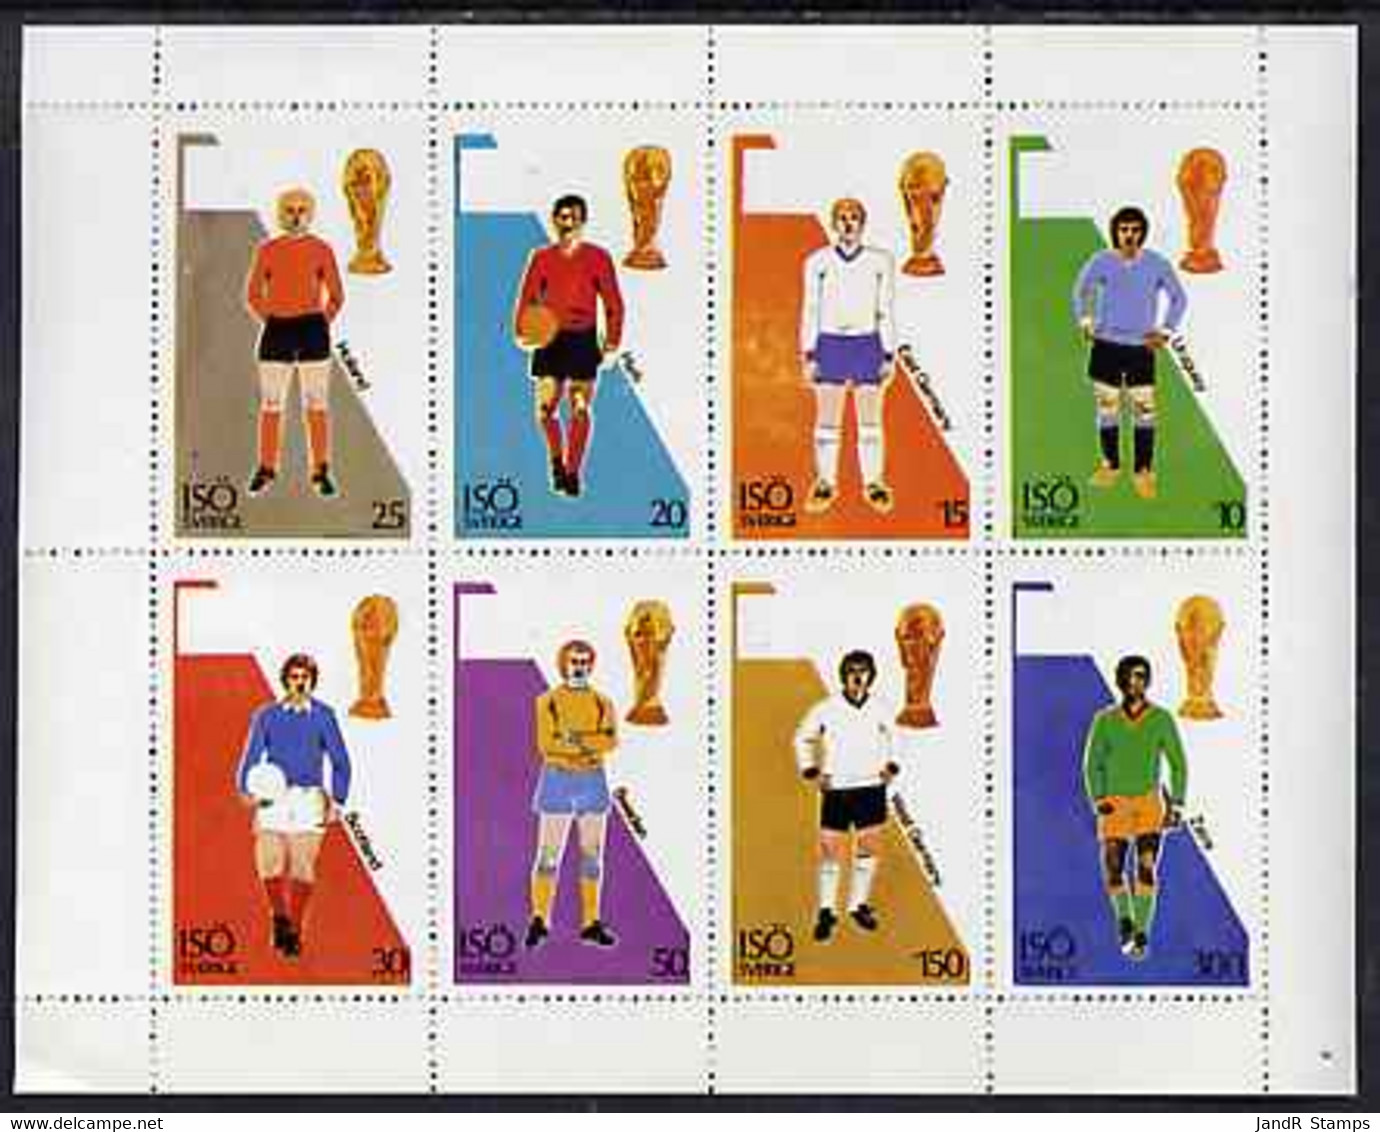 Iso - Sweden 1974? Football World Cup Perf Sheetlet Containing Set Of 8 Values MNH - Local Post Stamps